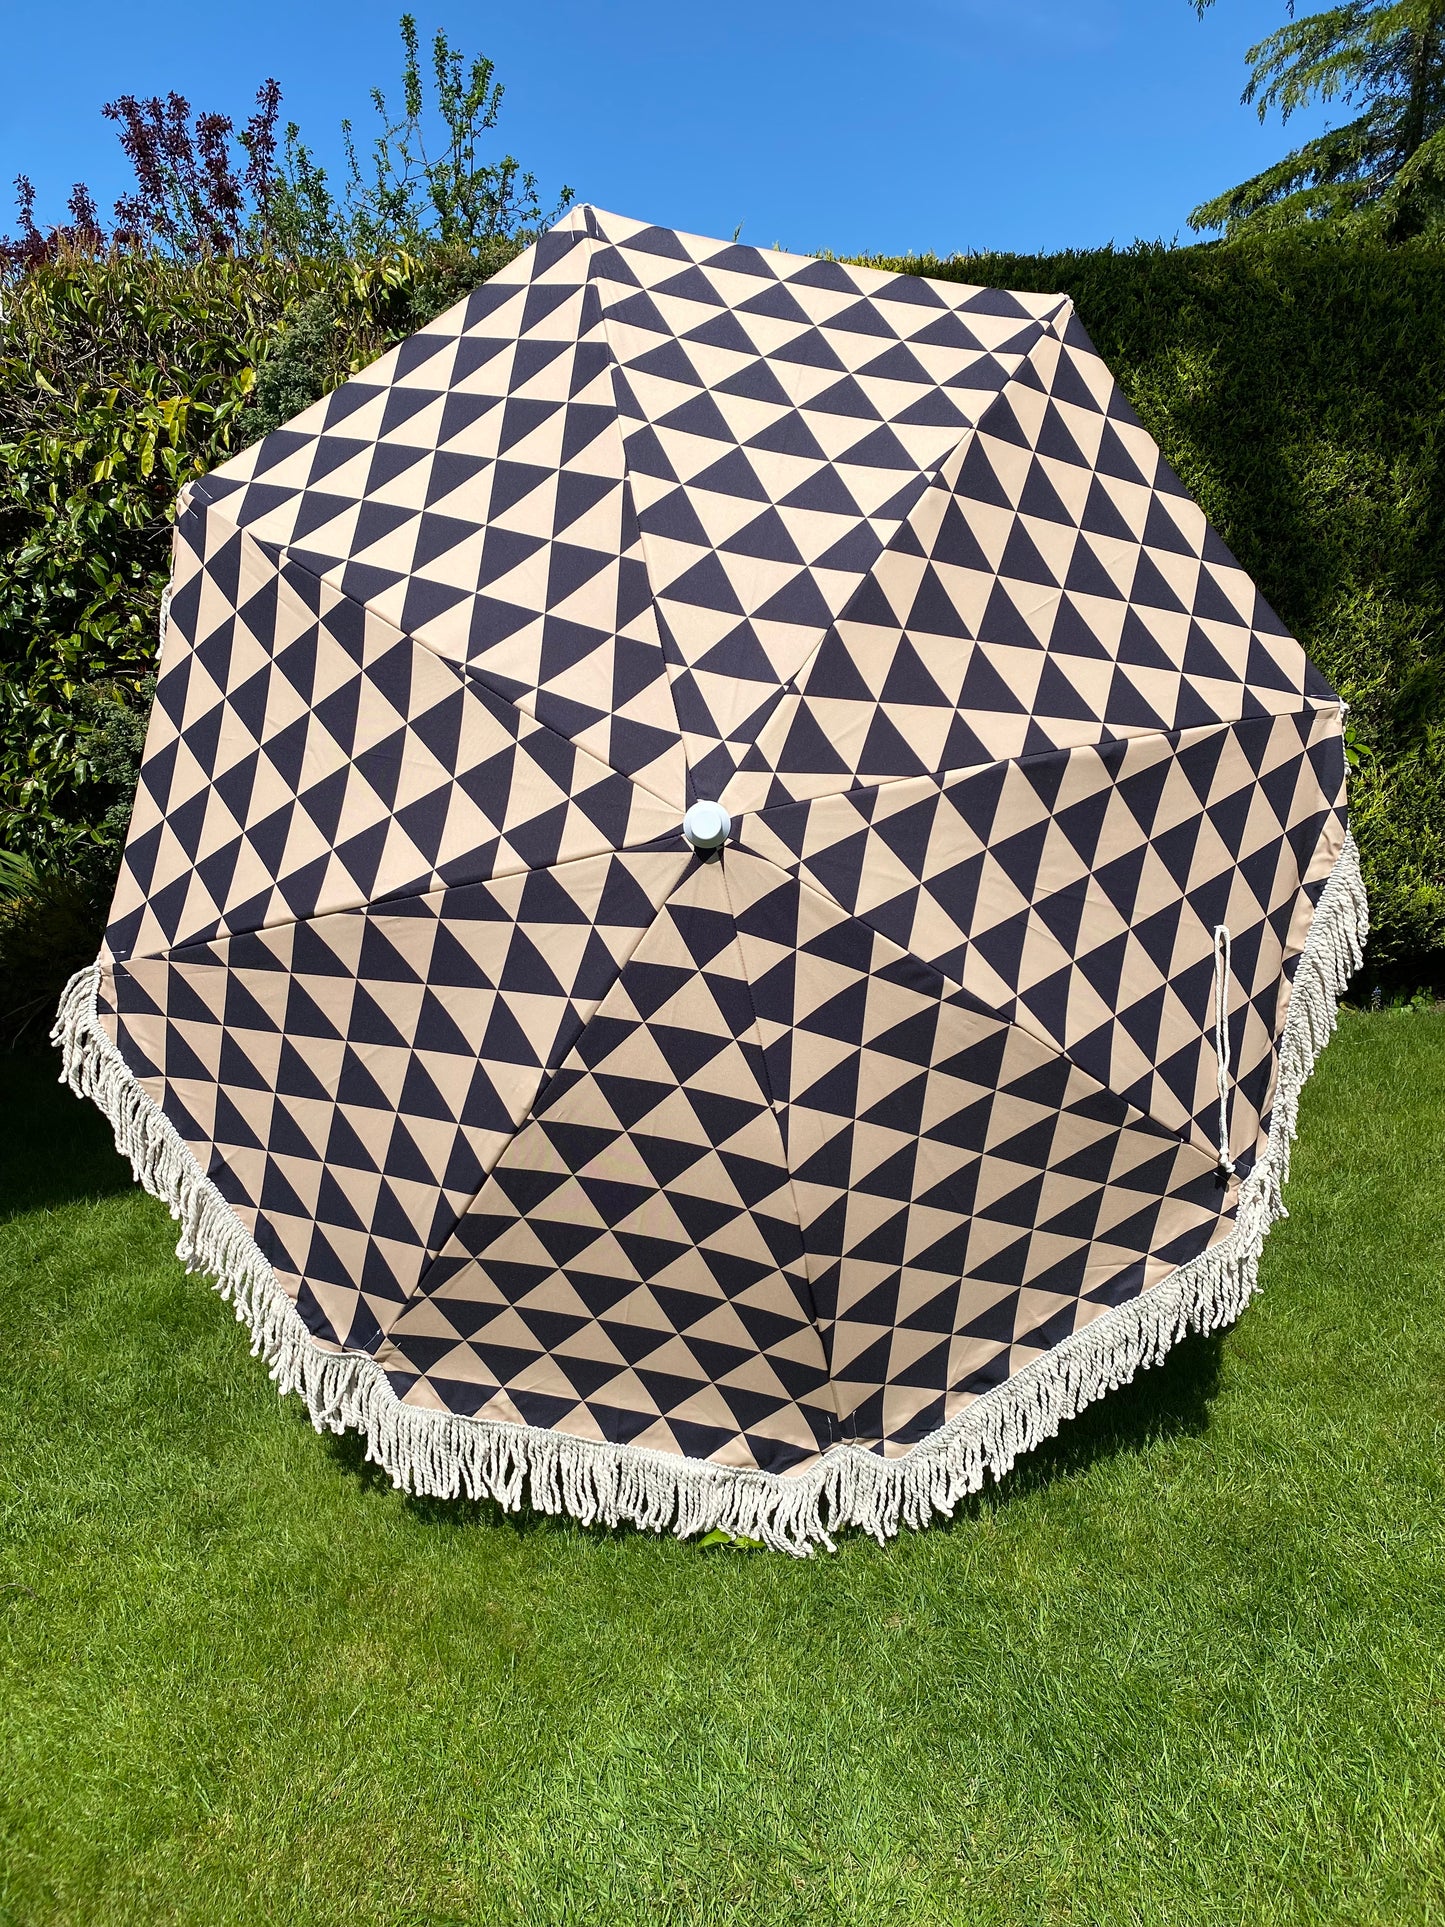 black and beige brown triangle parasol vintage style large umbrella